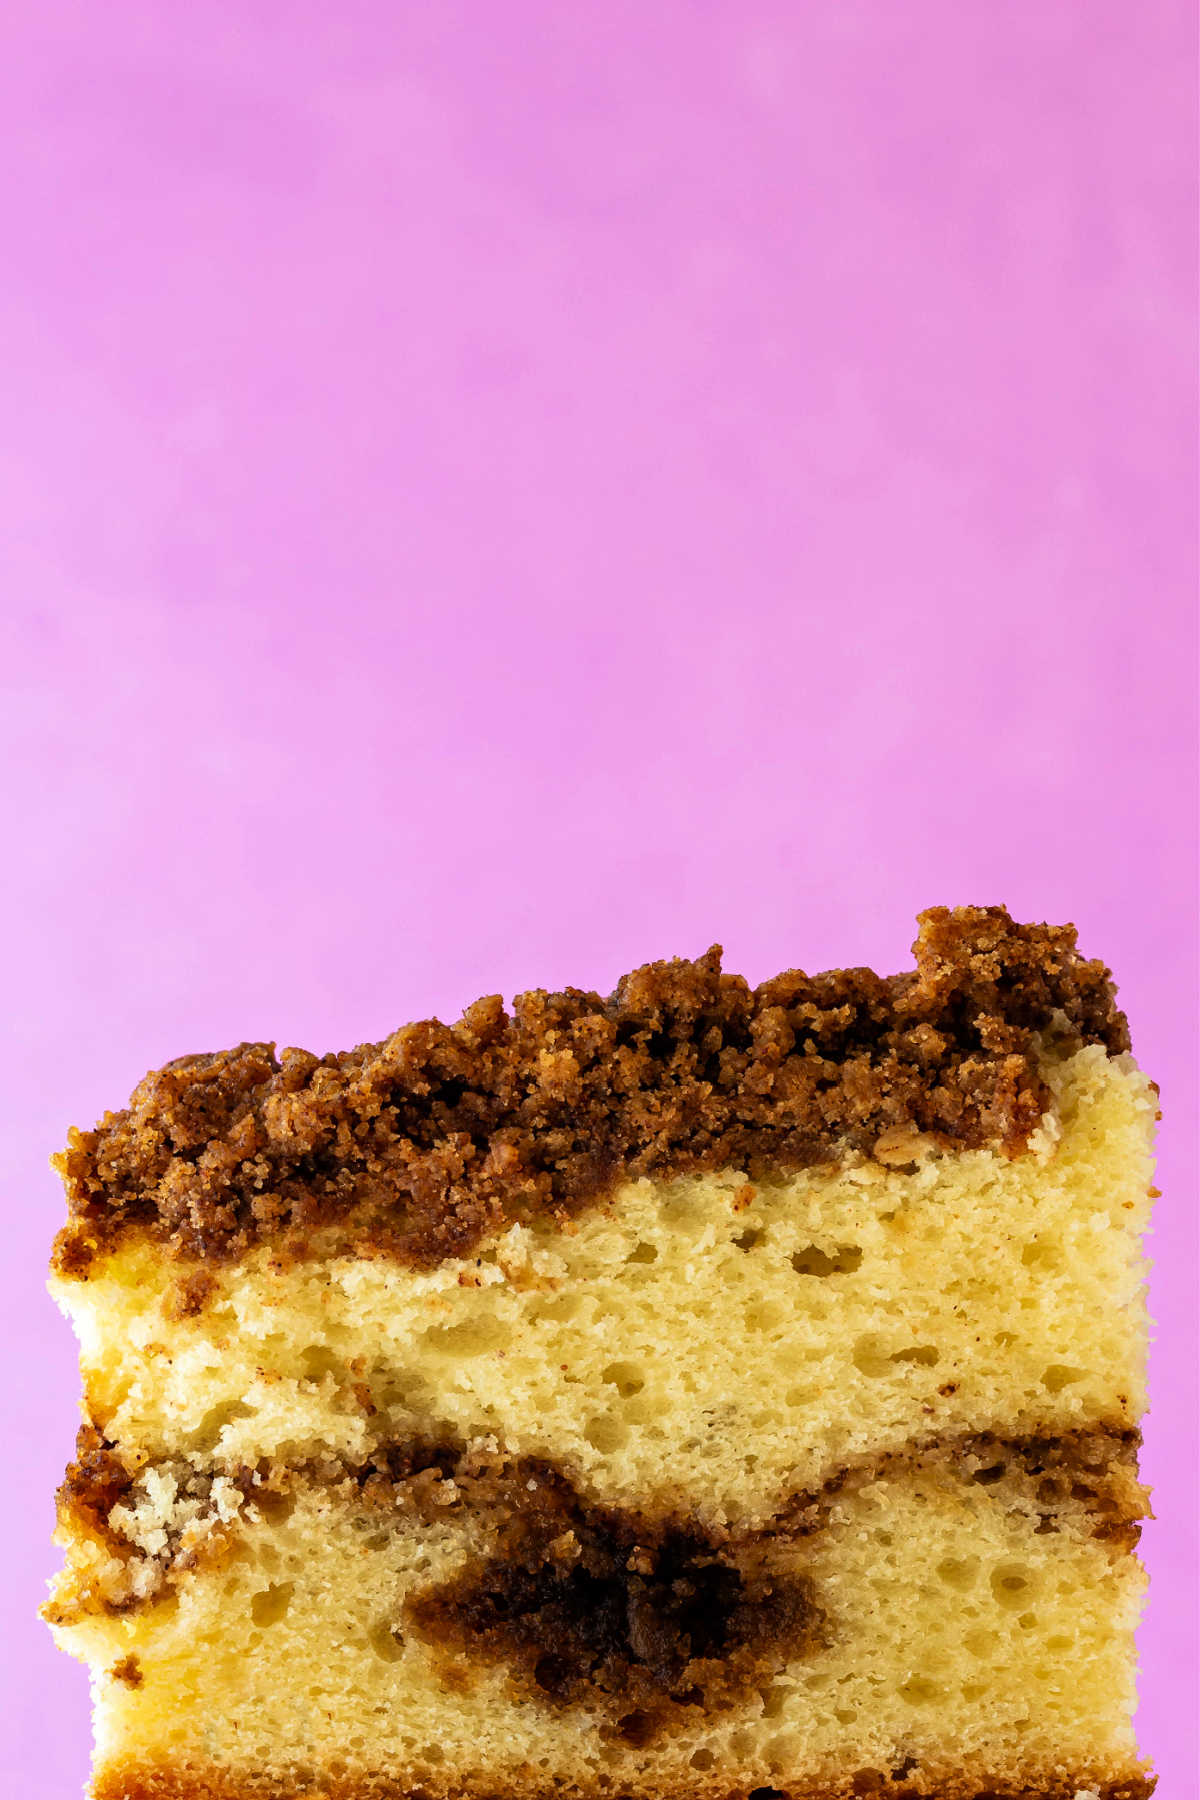 An up-close shot of a cross-section of a slice of cinnamon coffee cake with a ribbon of cinnamon filling in the middle and brown sugar cinnamon crumbs on top. It is shot on a pink background.